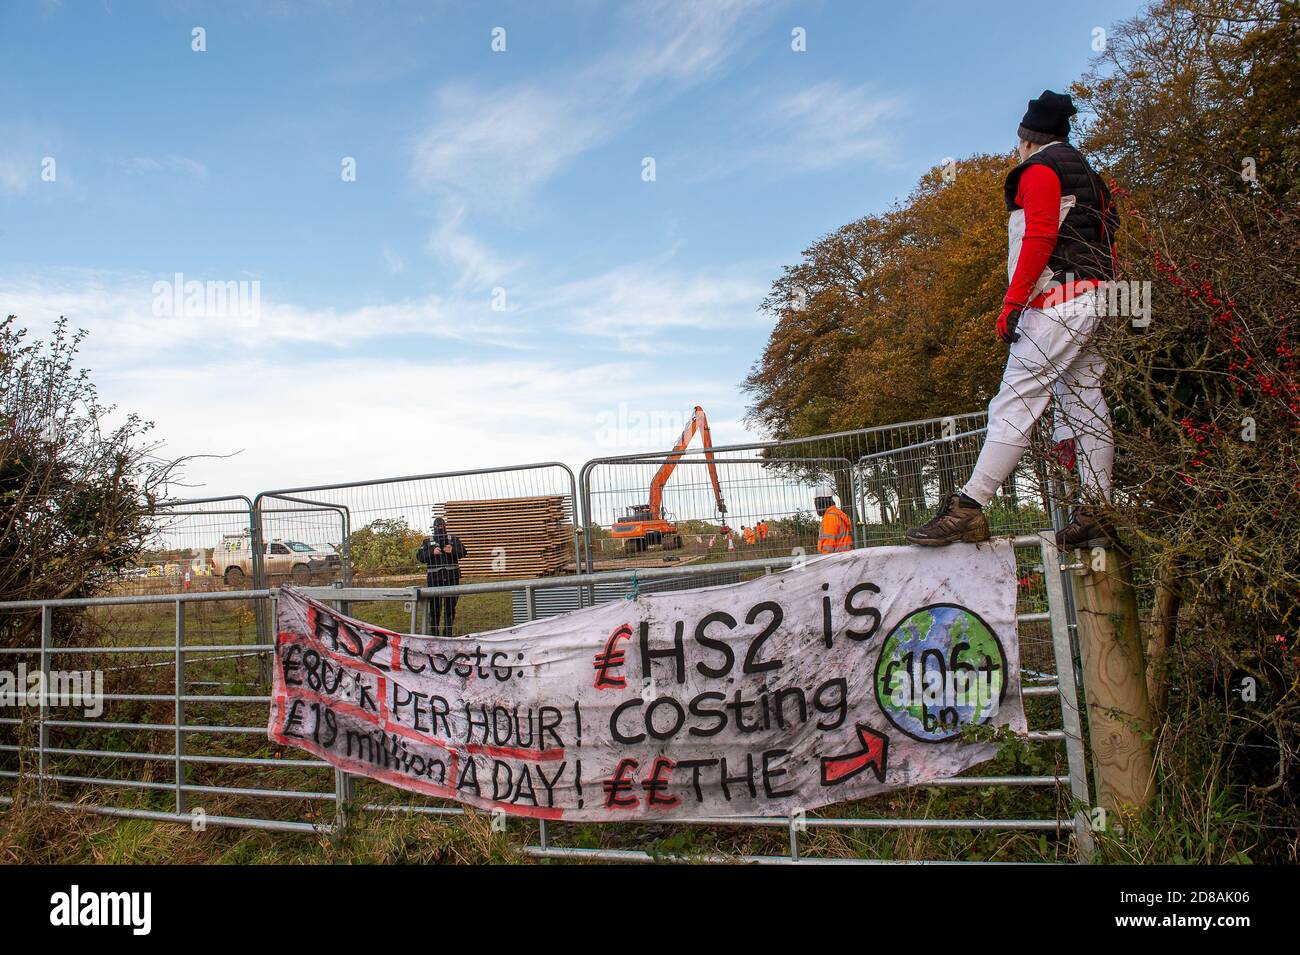 Aylesbury Vale, Buckinghamshire, UK. 28th October, 2020. HS2 were cutting huge limbs off trees in Grim's Ditch this morning watched on by a distraught peaceful lone female anti HS2 protester. Environmental campaigners allege that HS2 do not have a wildlife licence allowing them to fell in this area. HS2 were not able to provide the licence. The construction of the highly controversial and over budget High Speed Rail from London to Birmingham puts 108 ancient woodlands, 33 SSSIs and 693 wildlife sites at risk. Credit: Maureen McLean/Alamy Live News Stock Photo